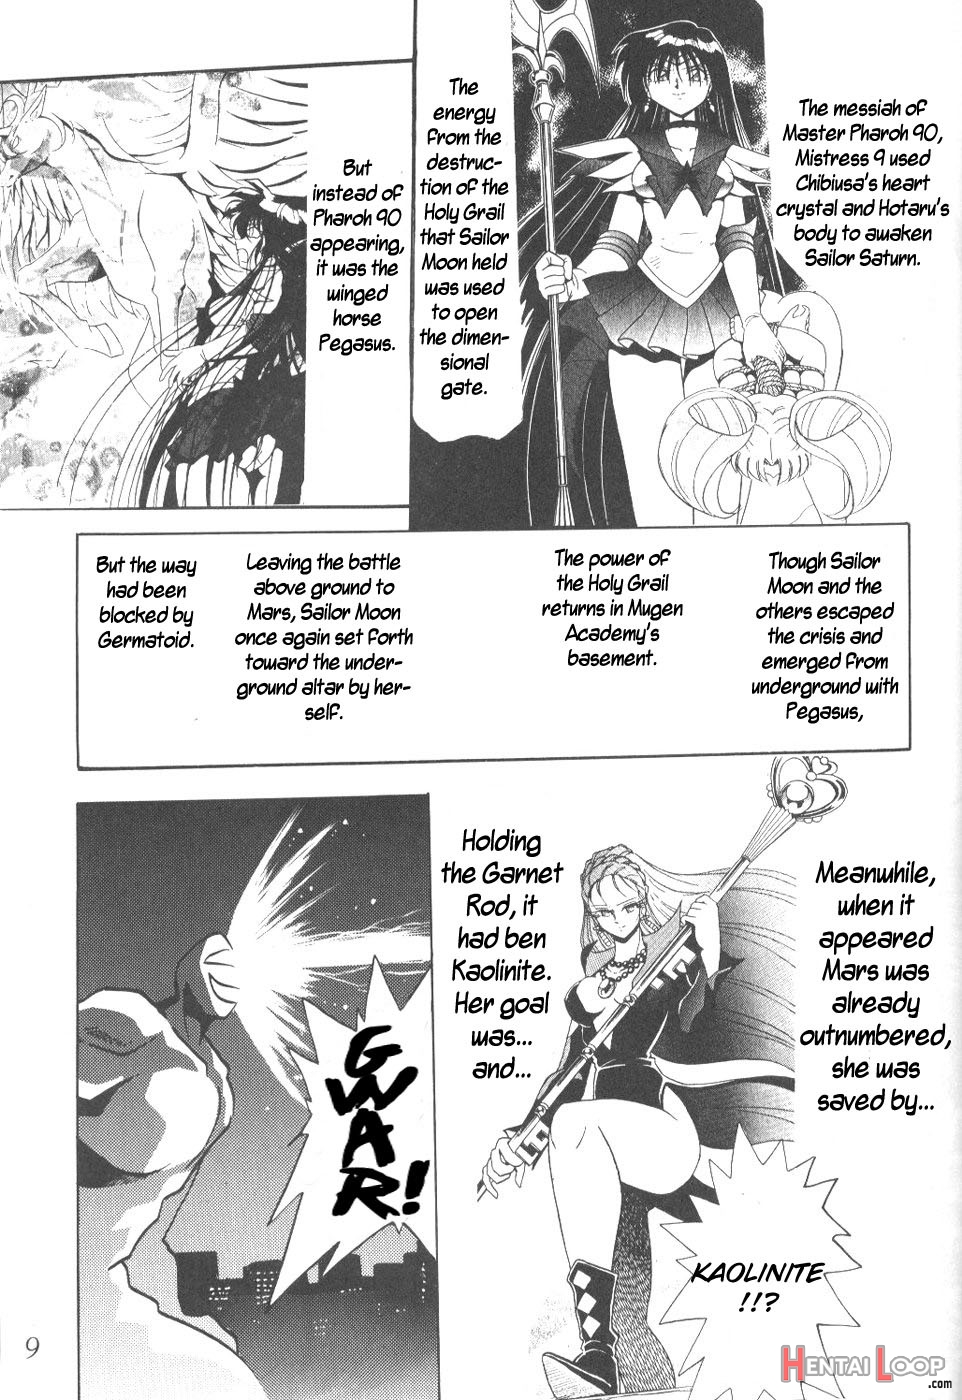 Silent Saturn 9 page 7